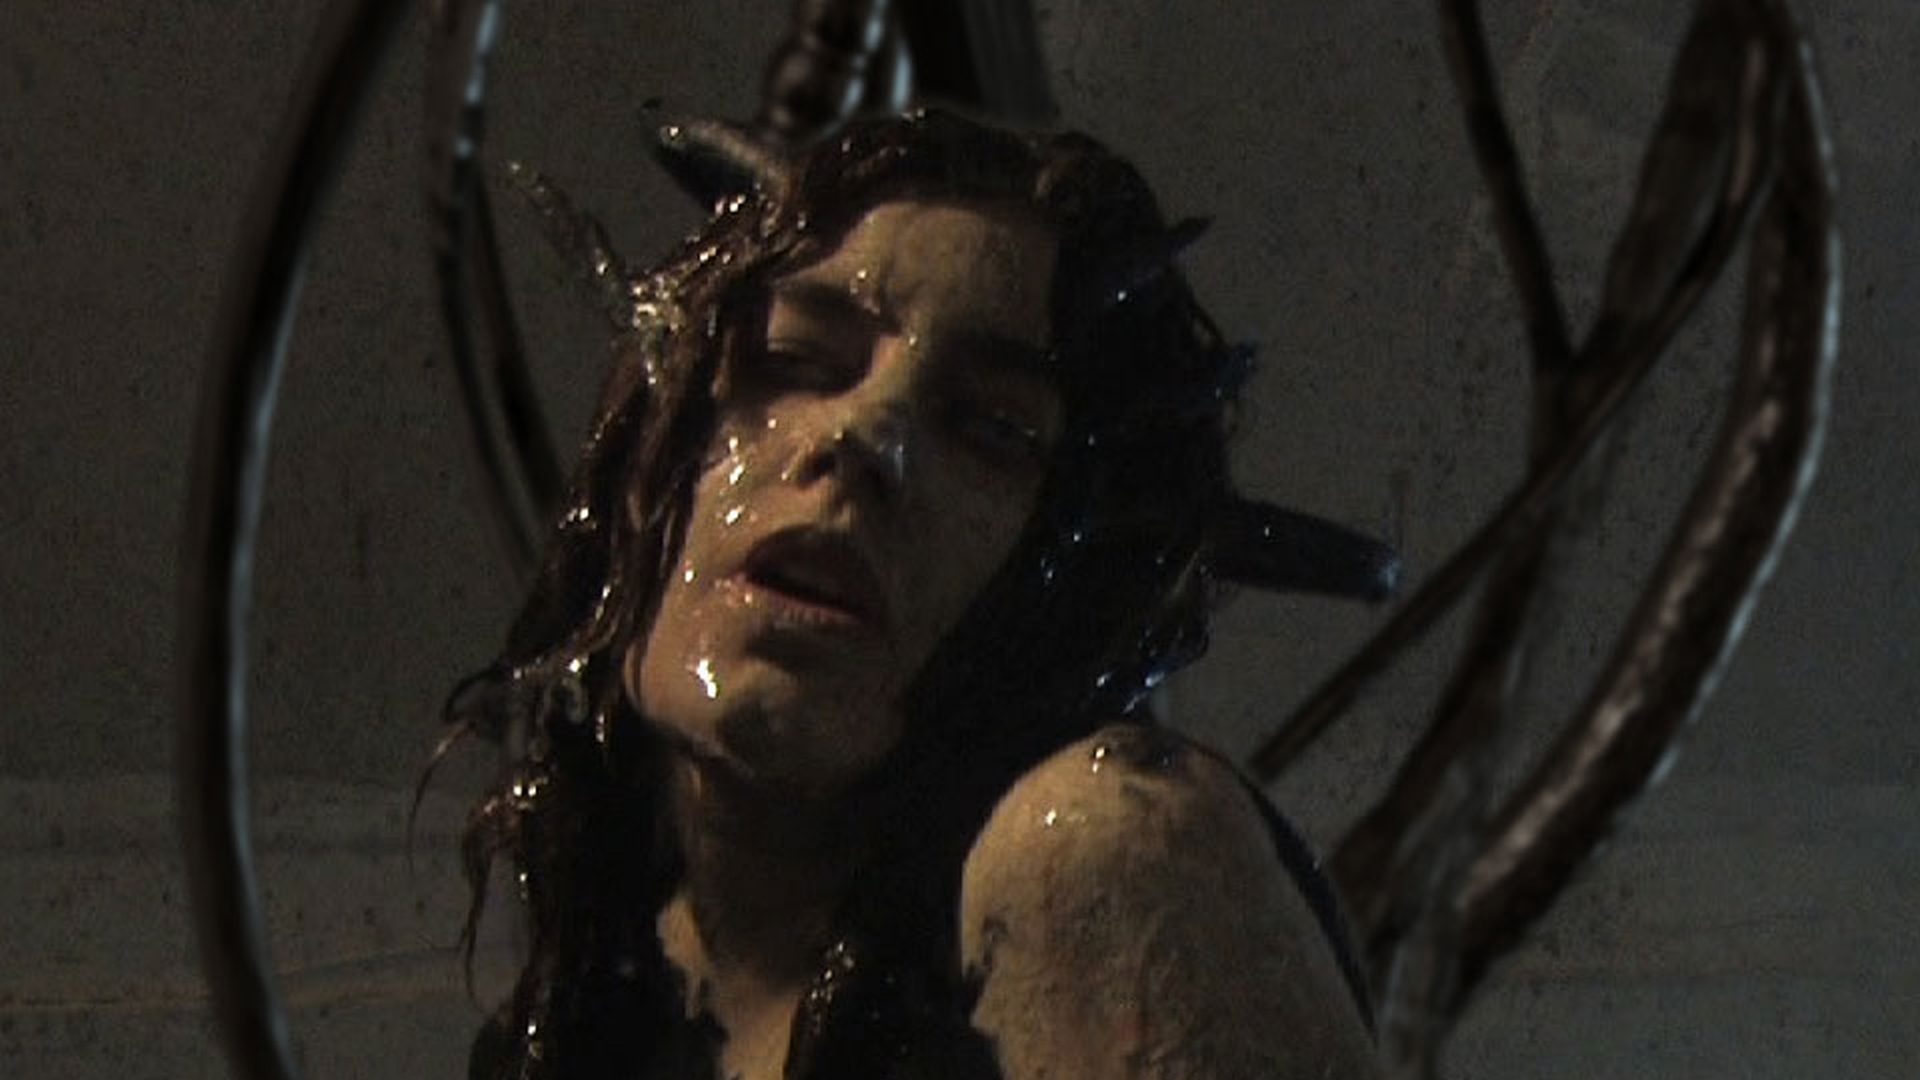 Slime pouring out of a biohazard container in a movie scene.